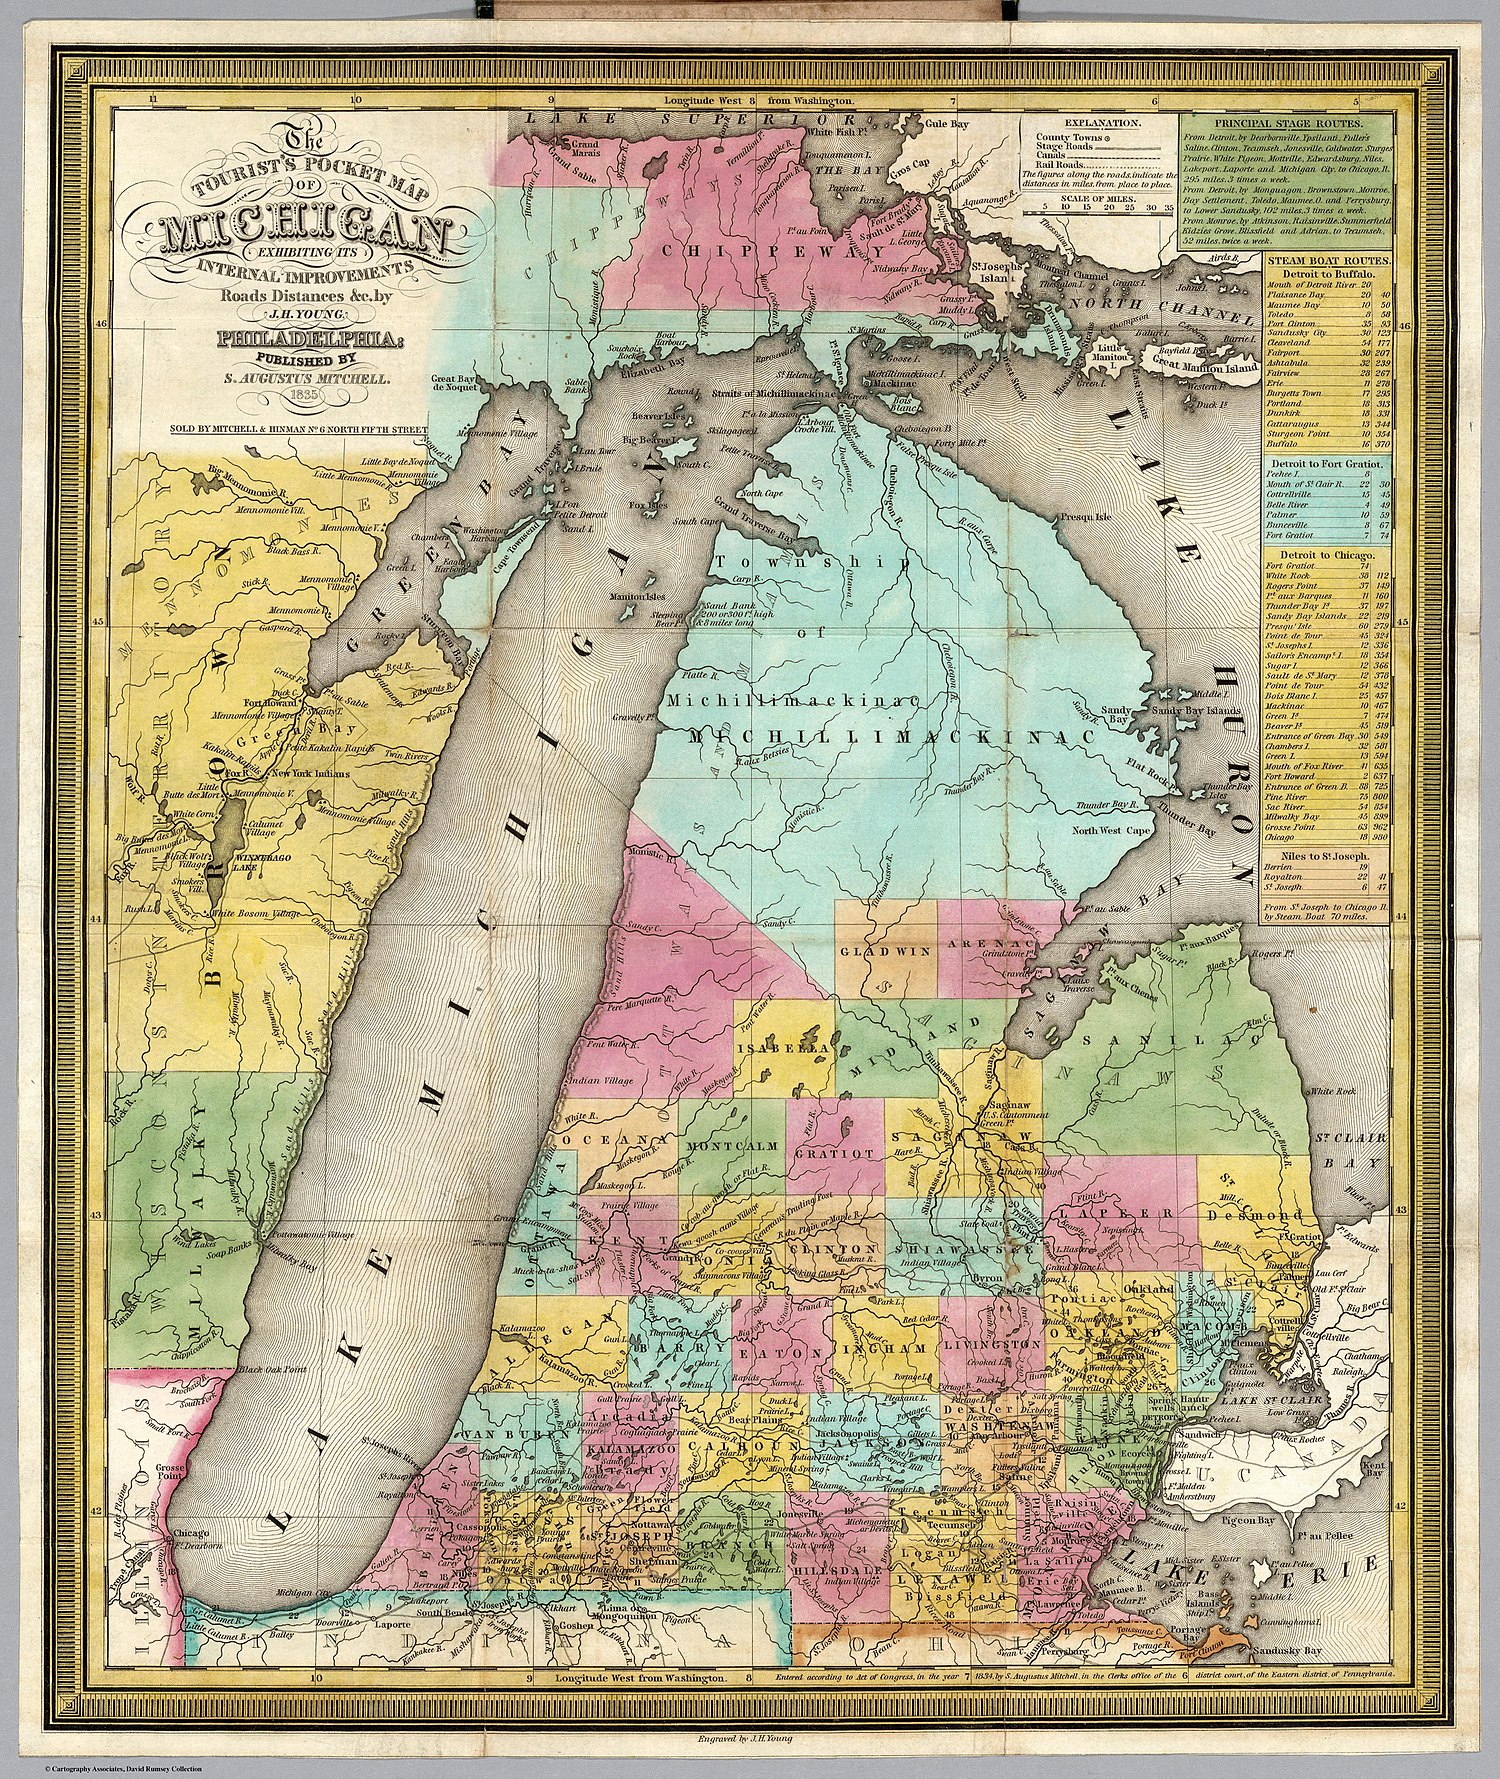 Wisconsin Territory depicted on this 1835 Tourist's Pocket Map Of Michigan, showing a Menominee-filled Brown County, Wisconsin, that spans the northern half of the territory